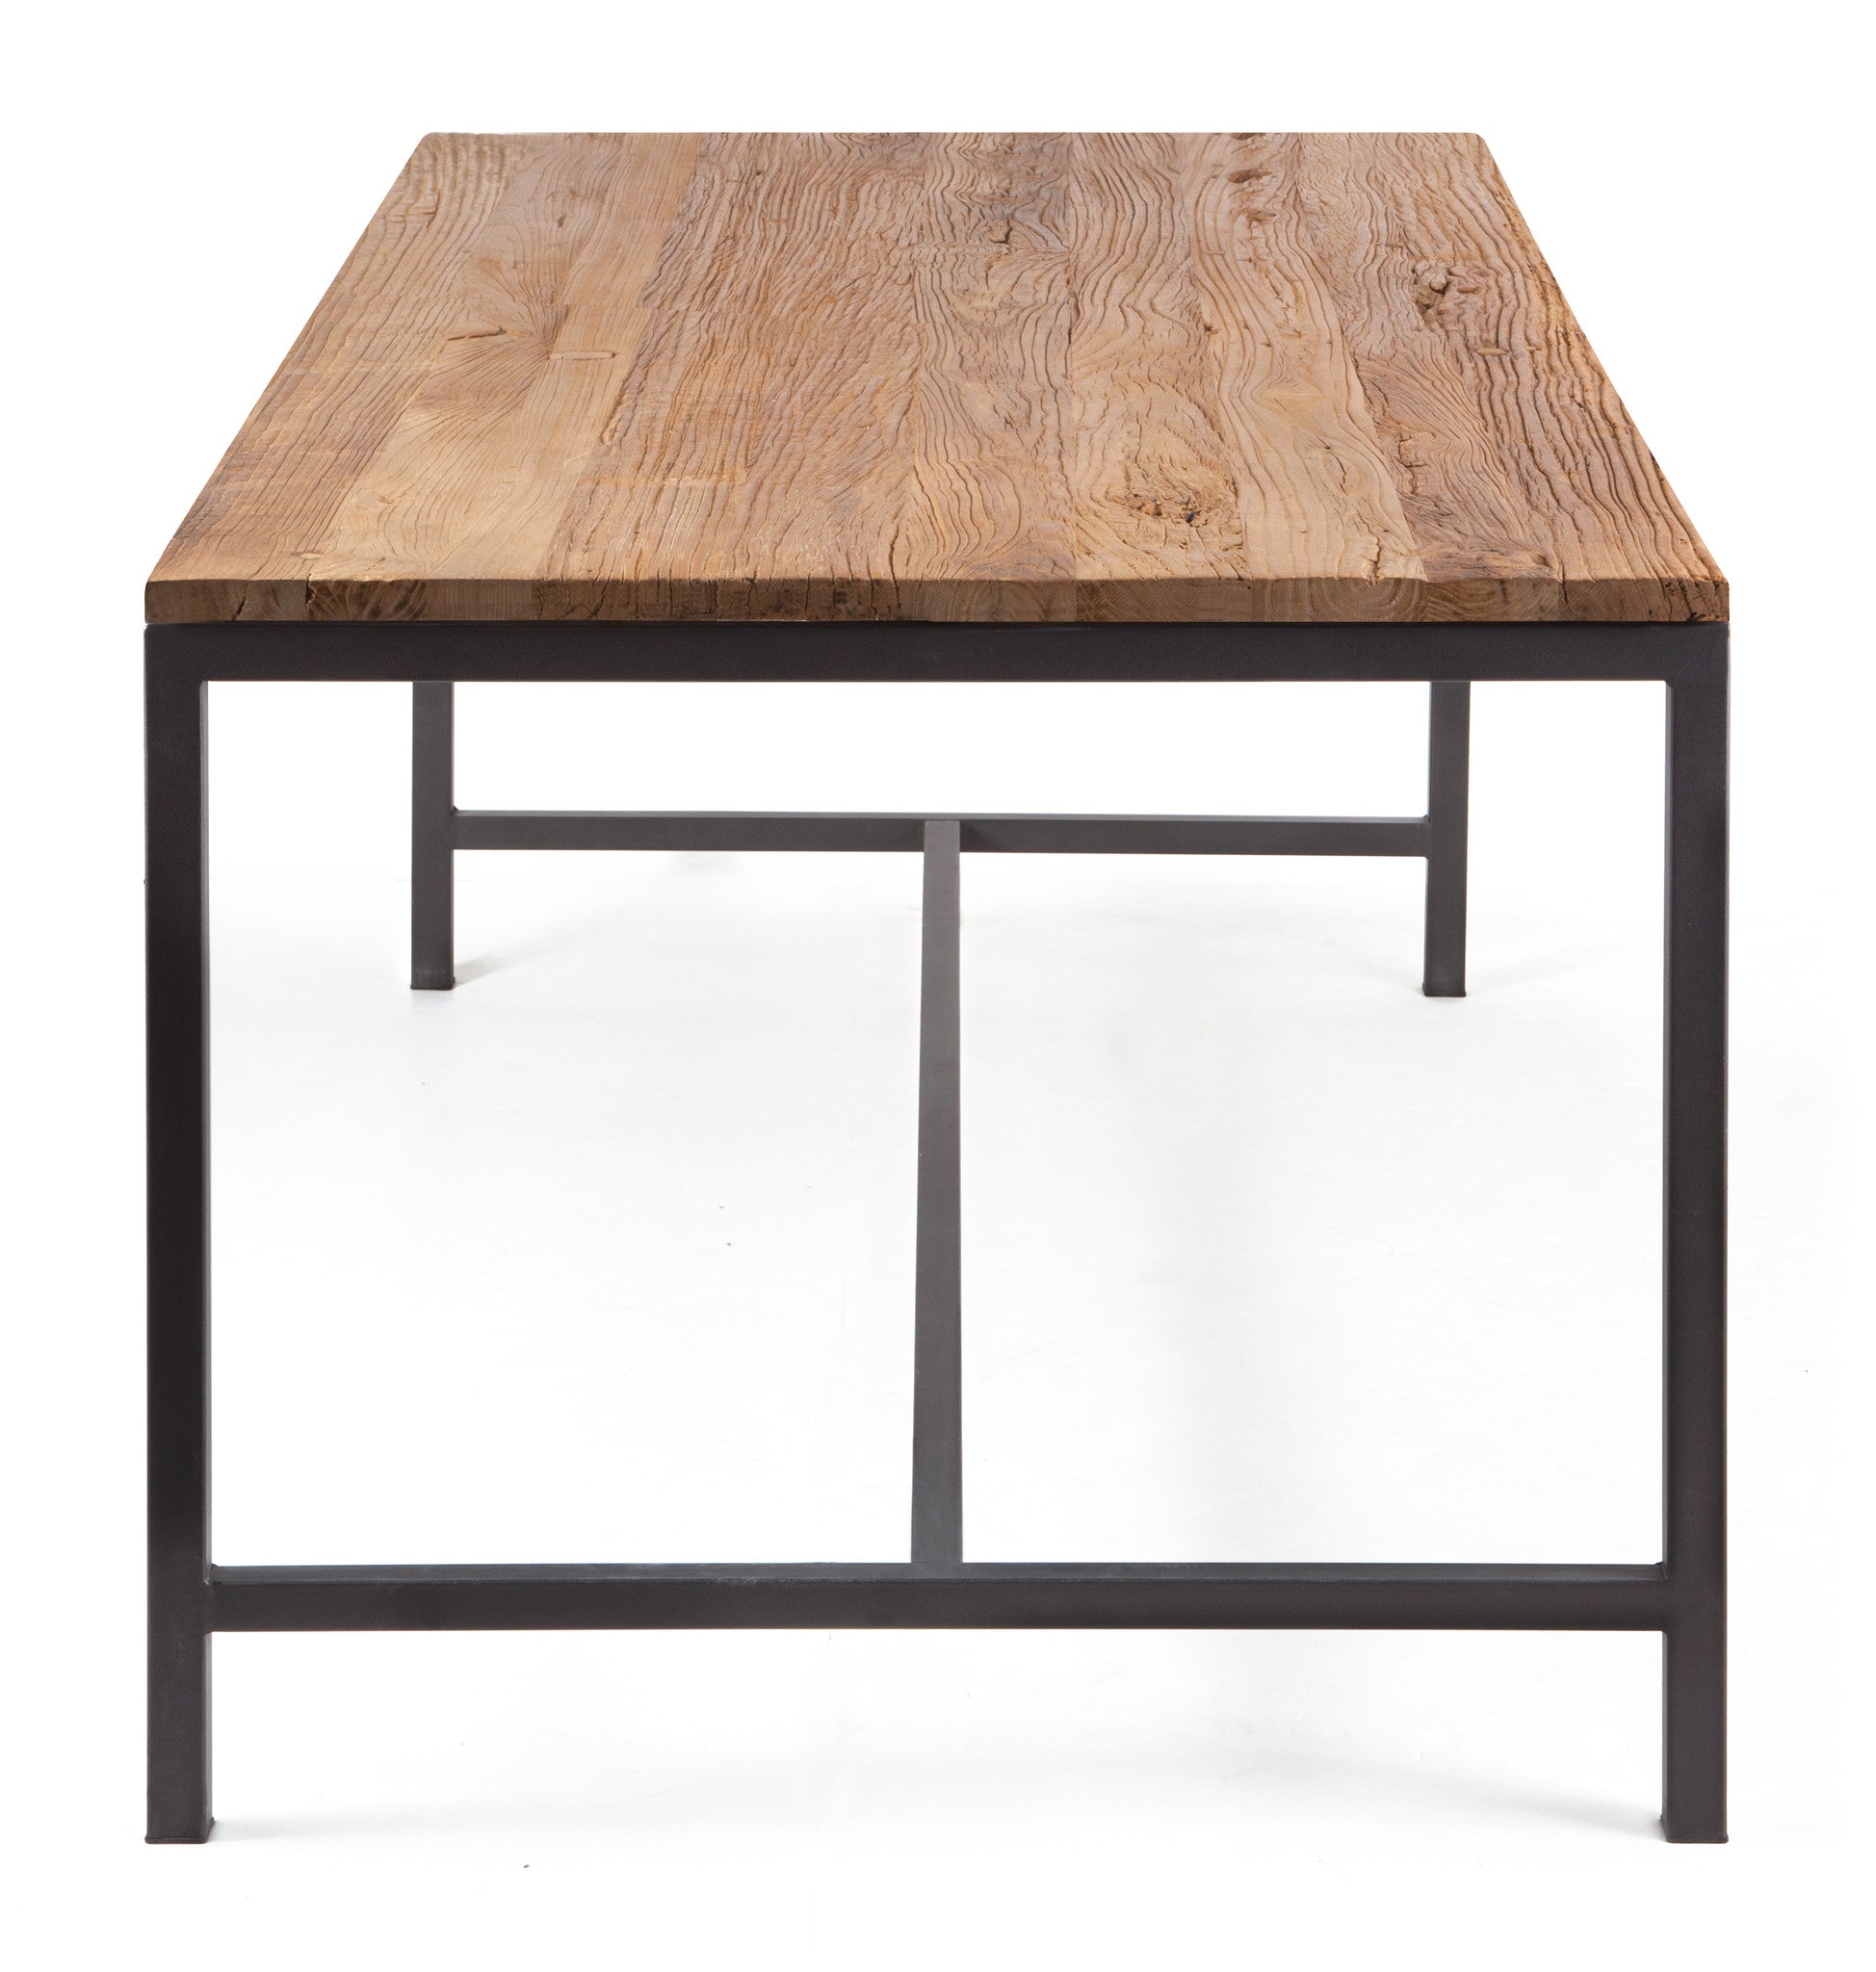 Malden Dining Table Distressed Natural